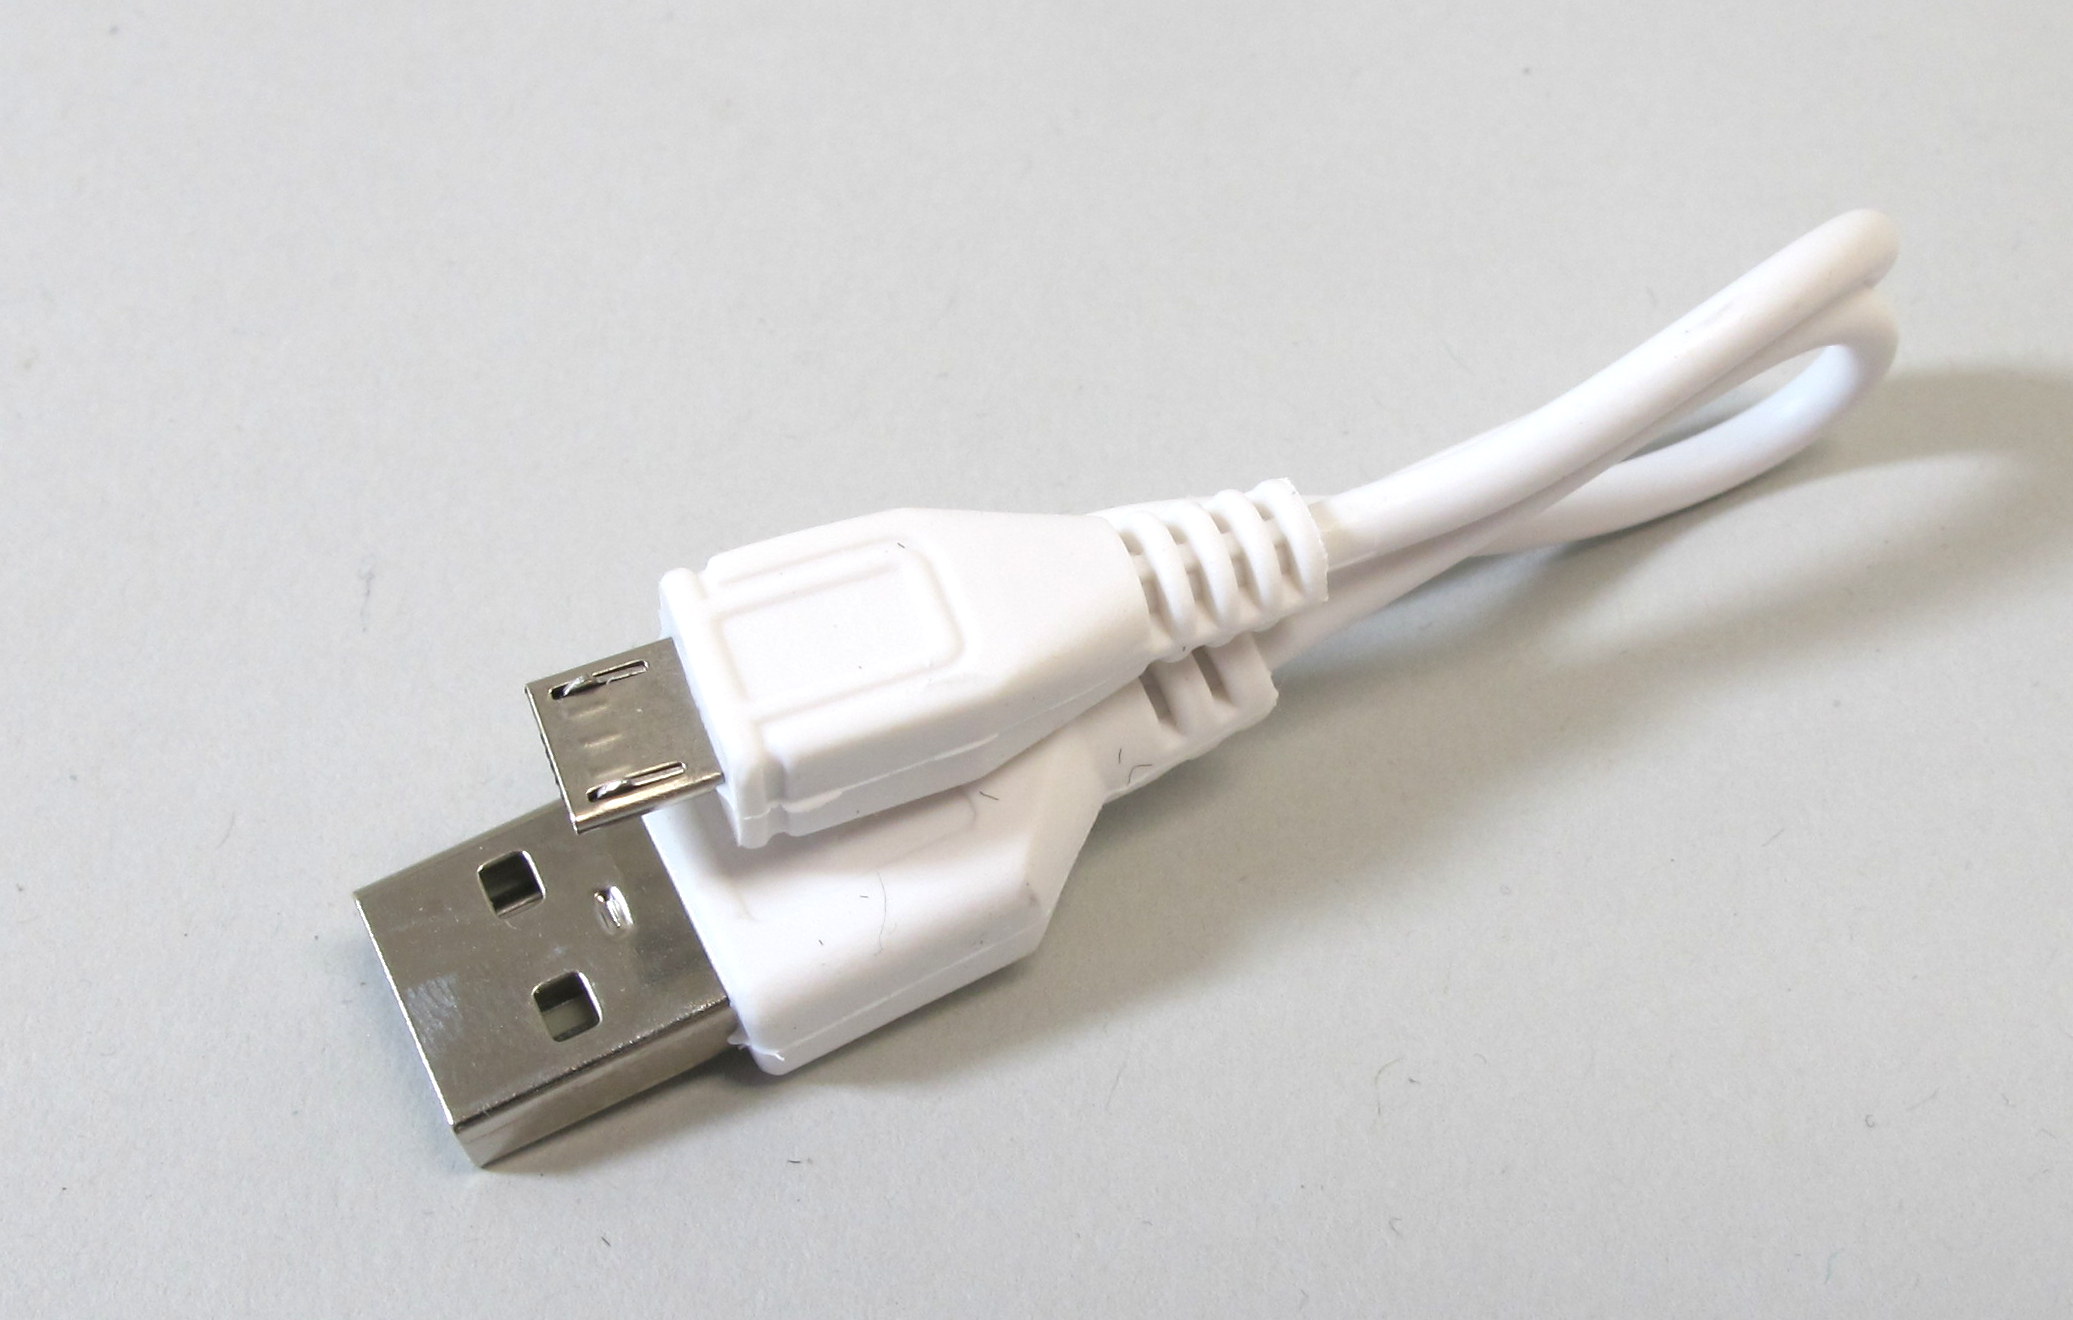 5V USB cable to Micro USB, white 25 cm